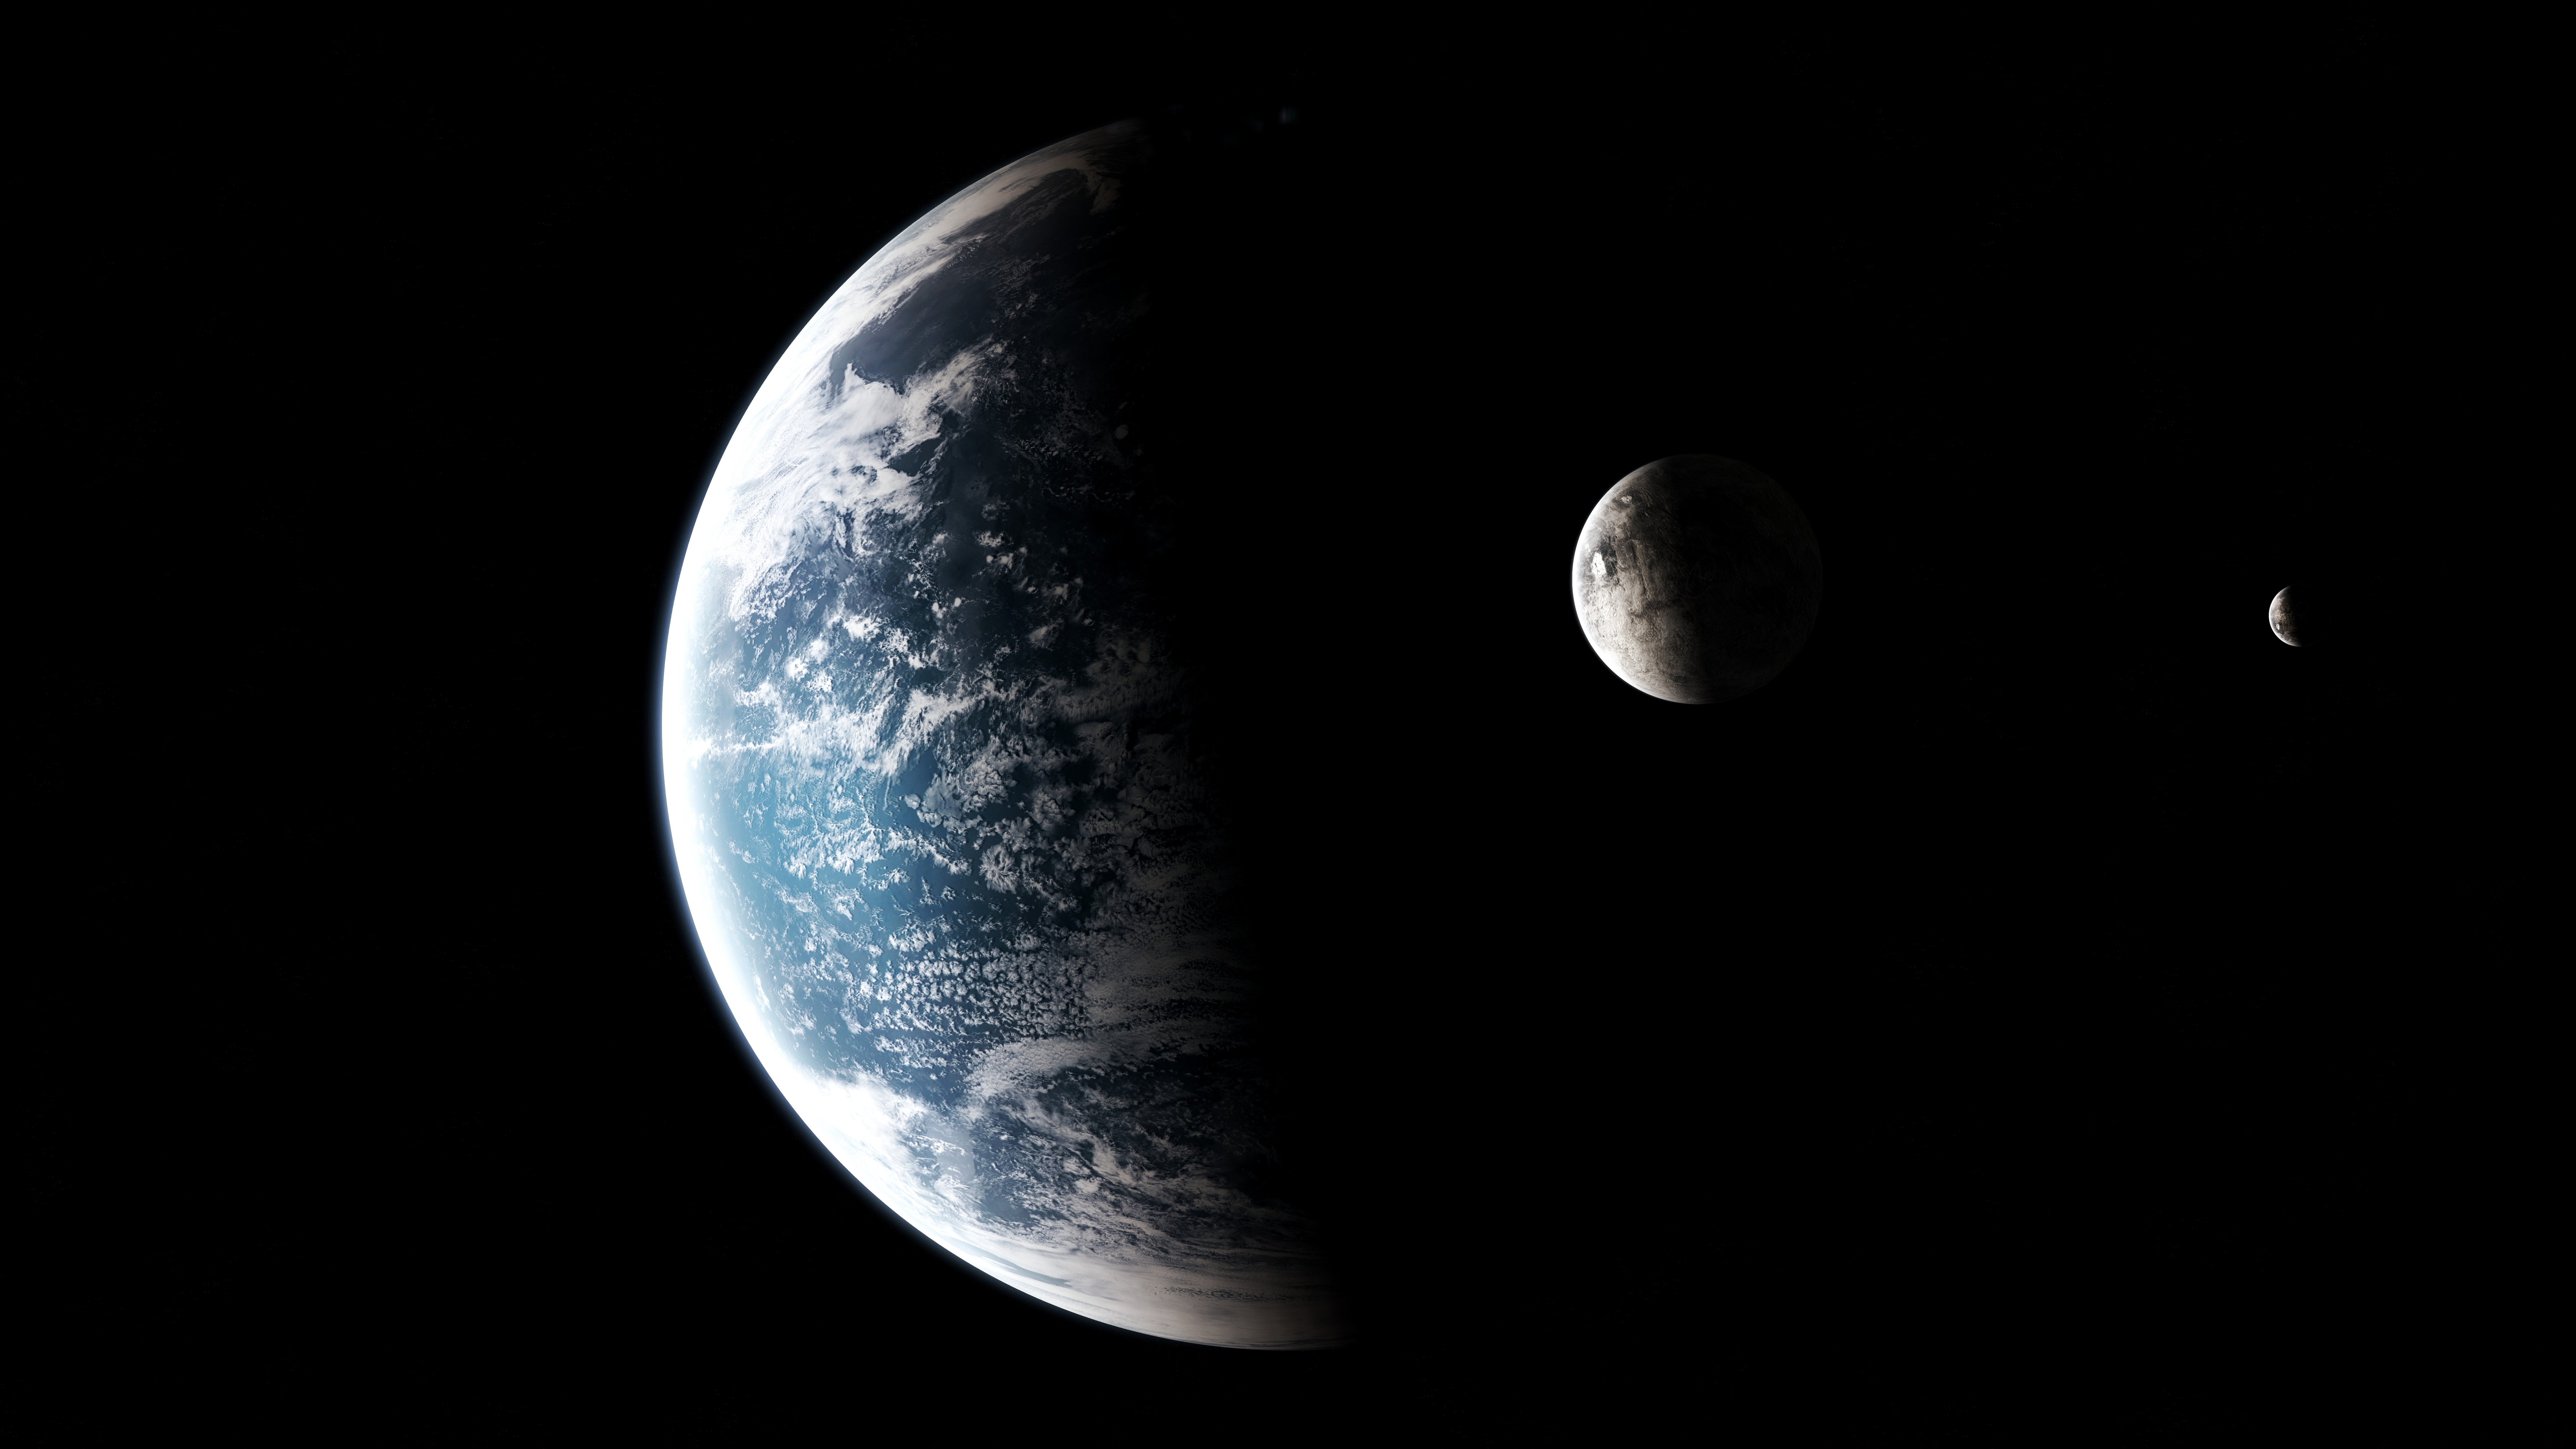 General 7680x4320 Earth space planet black Moon